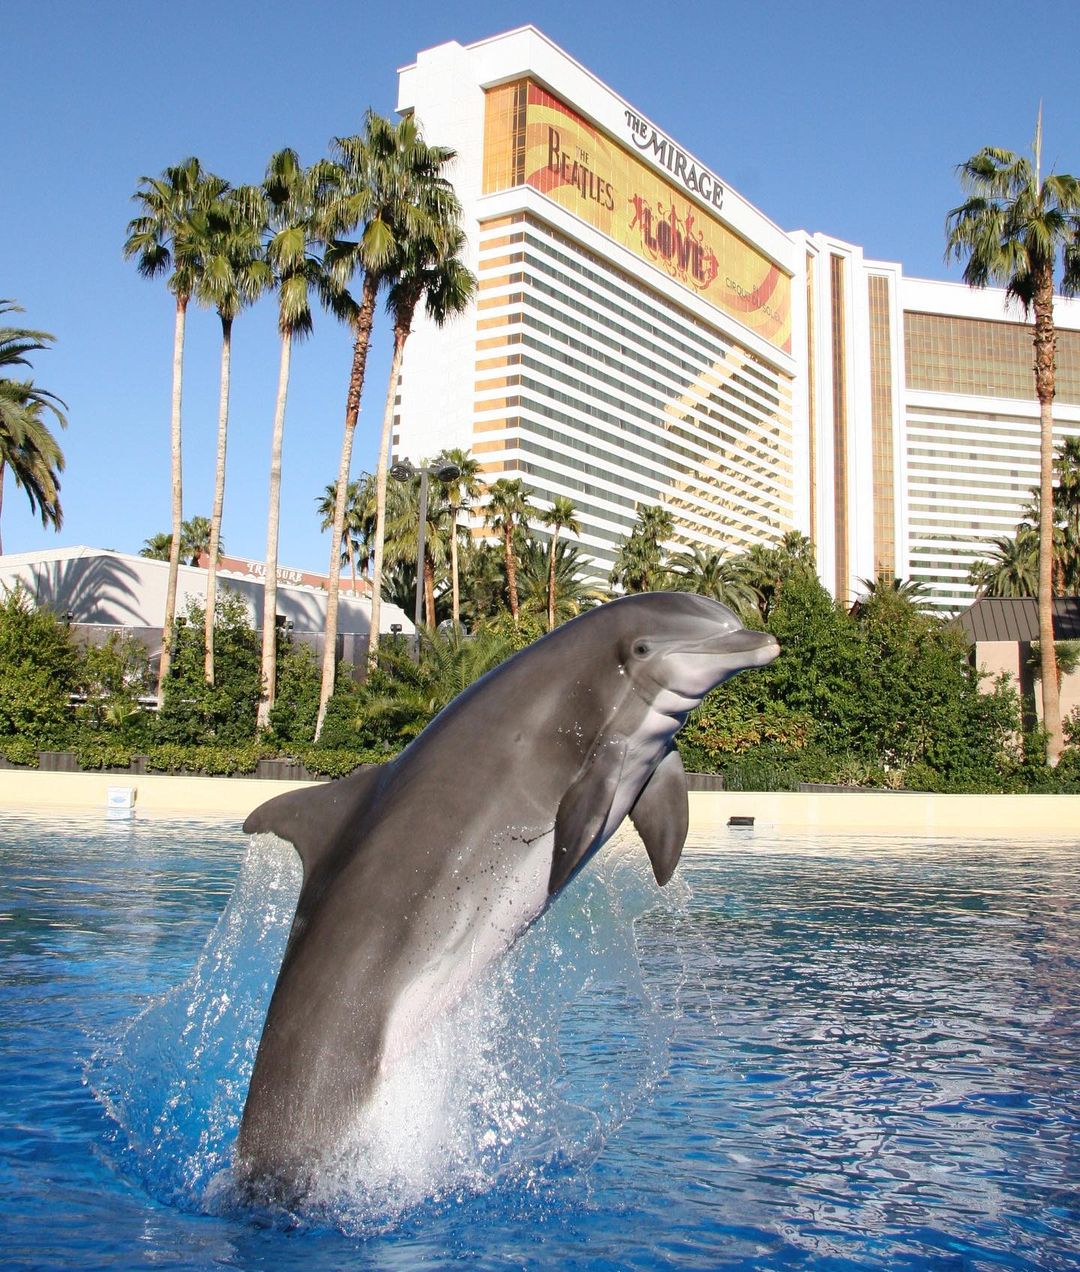 Dolphin jumping in a pool on the Las Vegas Strip. Photo by @booth.life